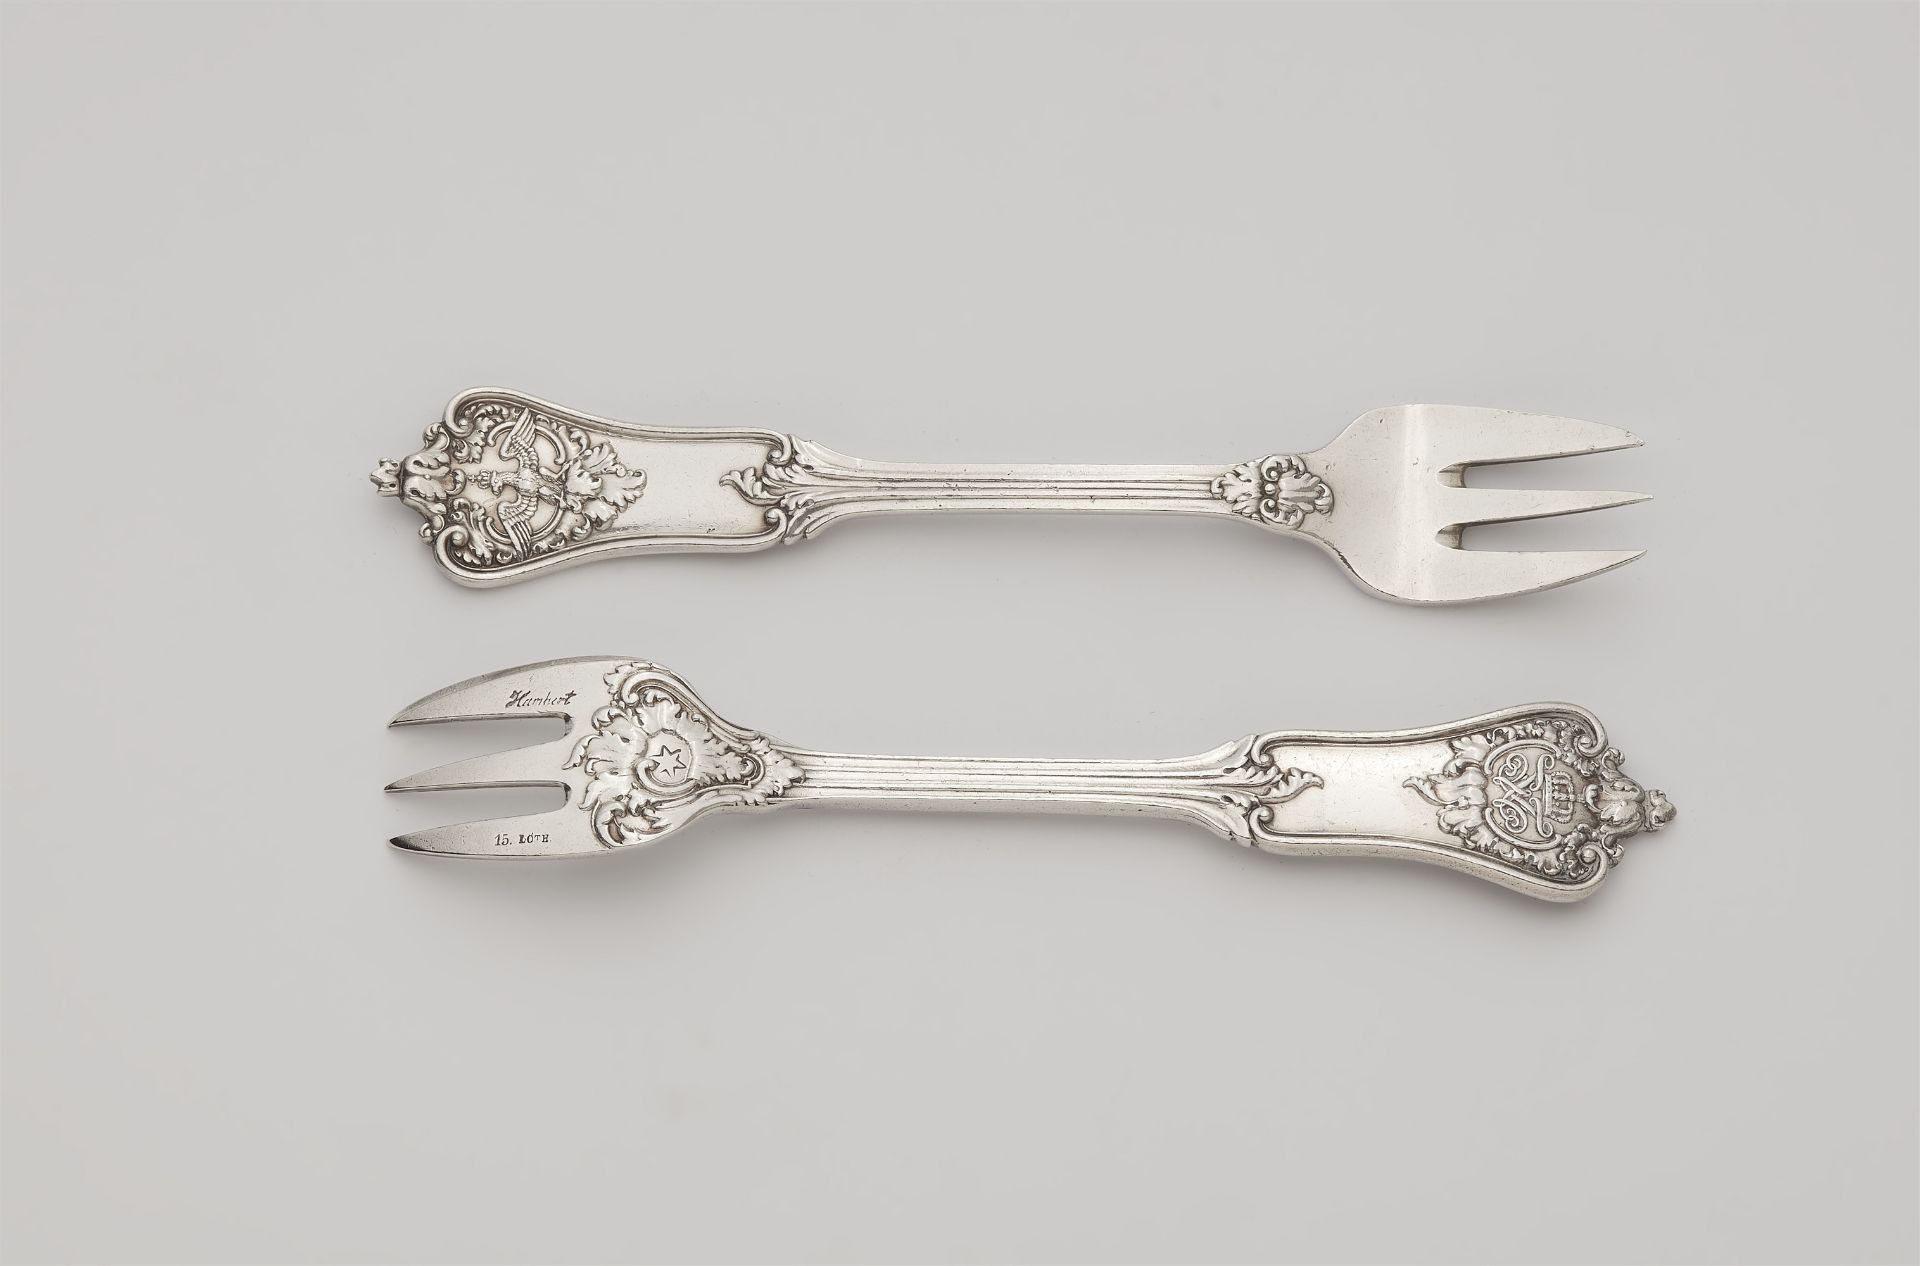 Two Berlin silver oyster forks made for Frederick William IV